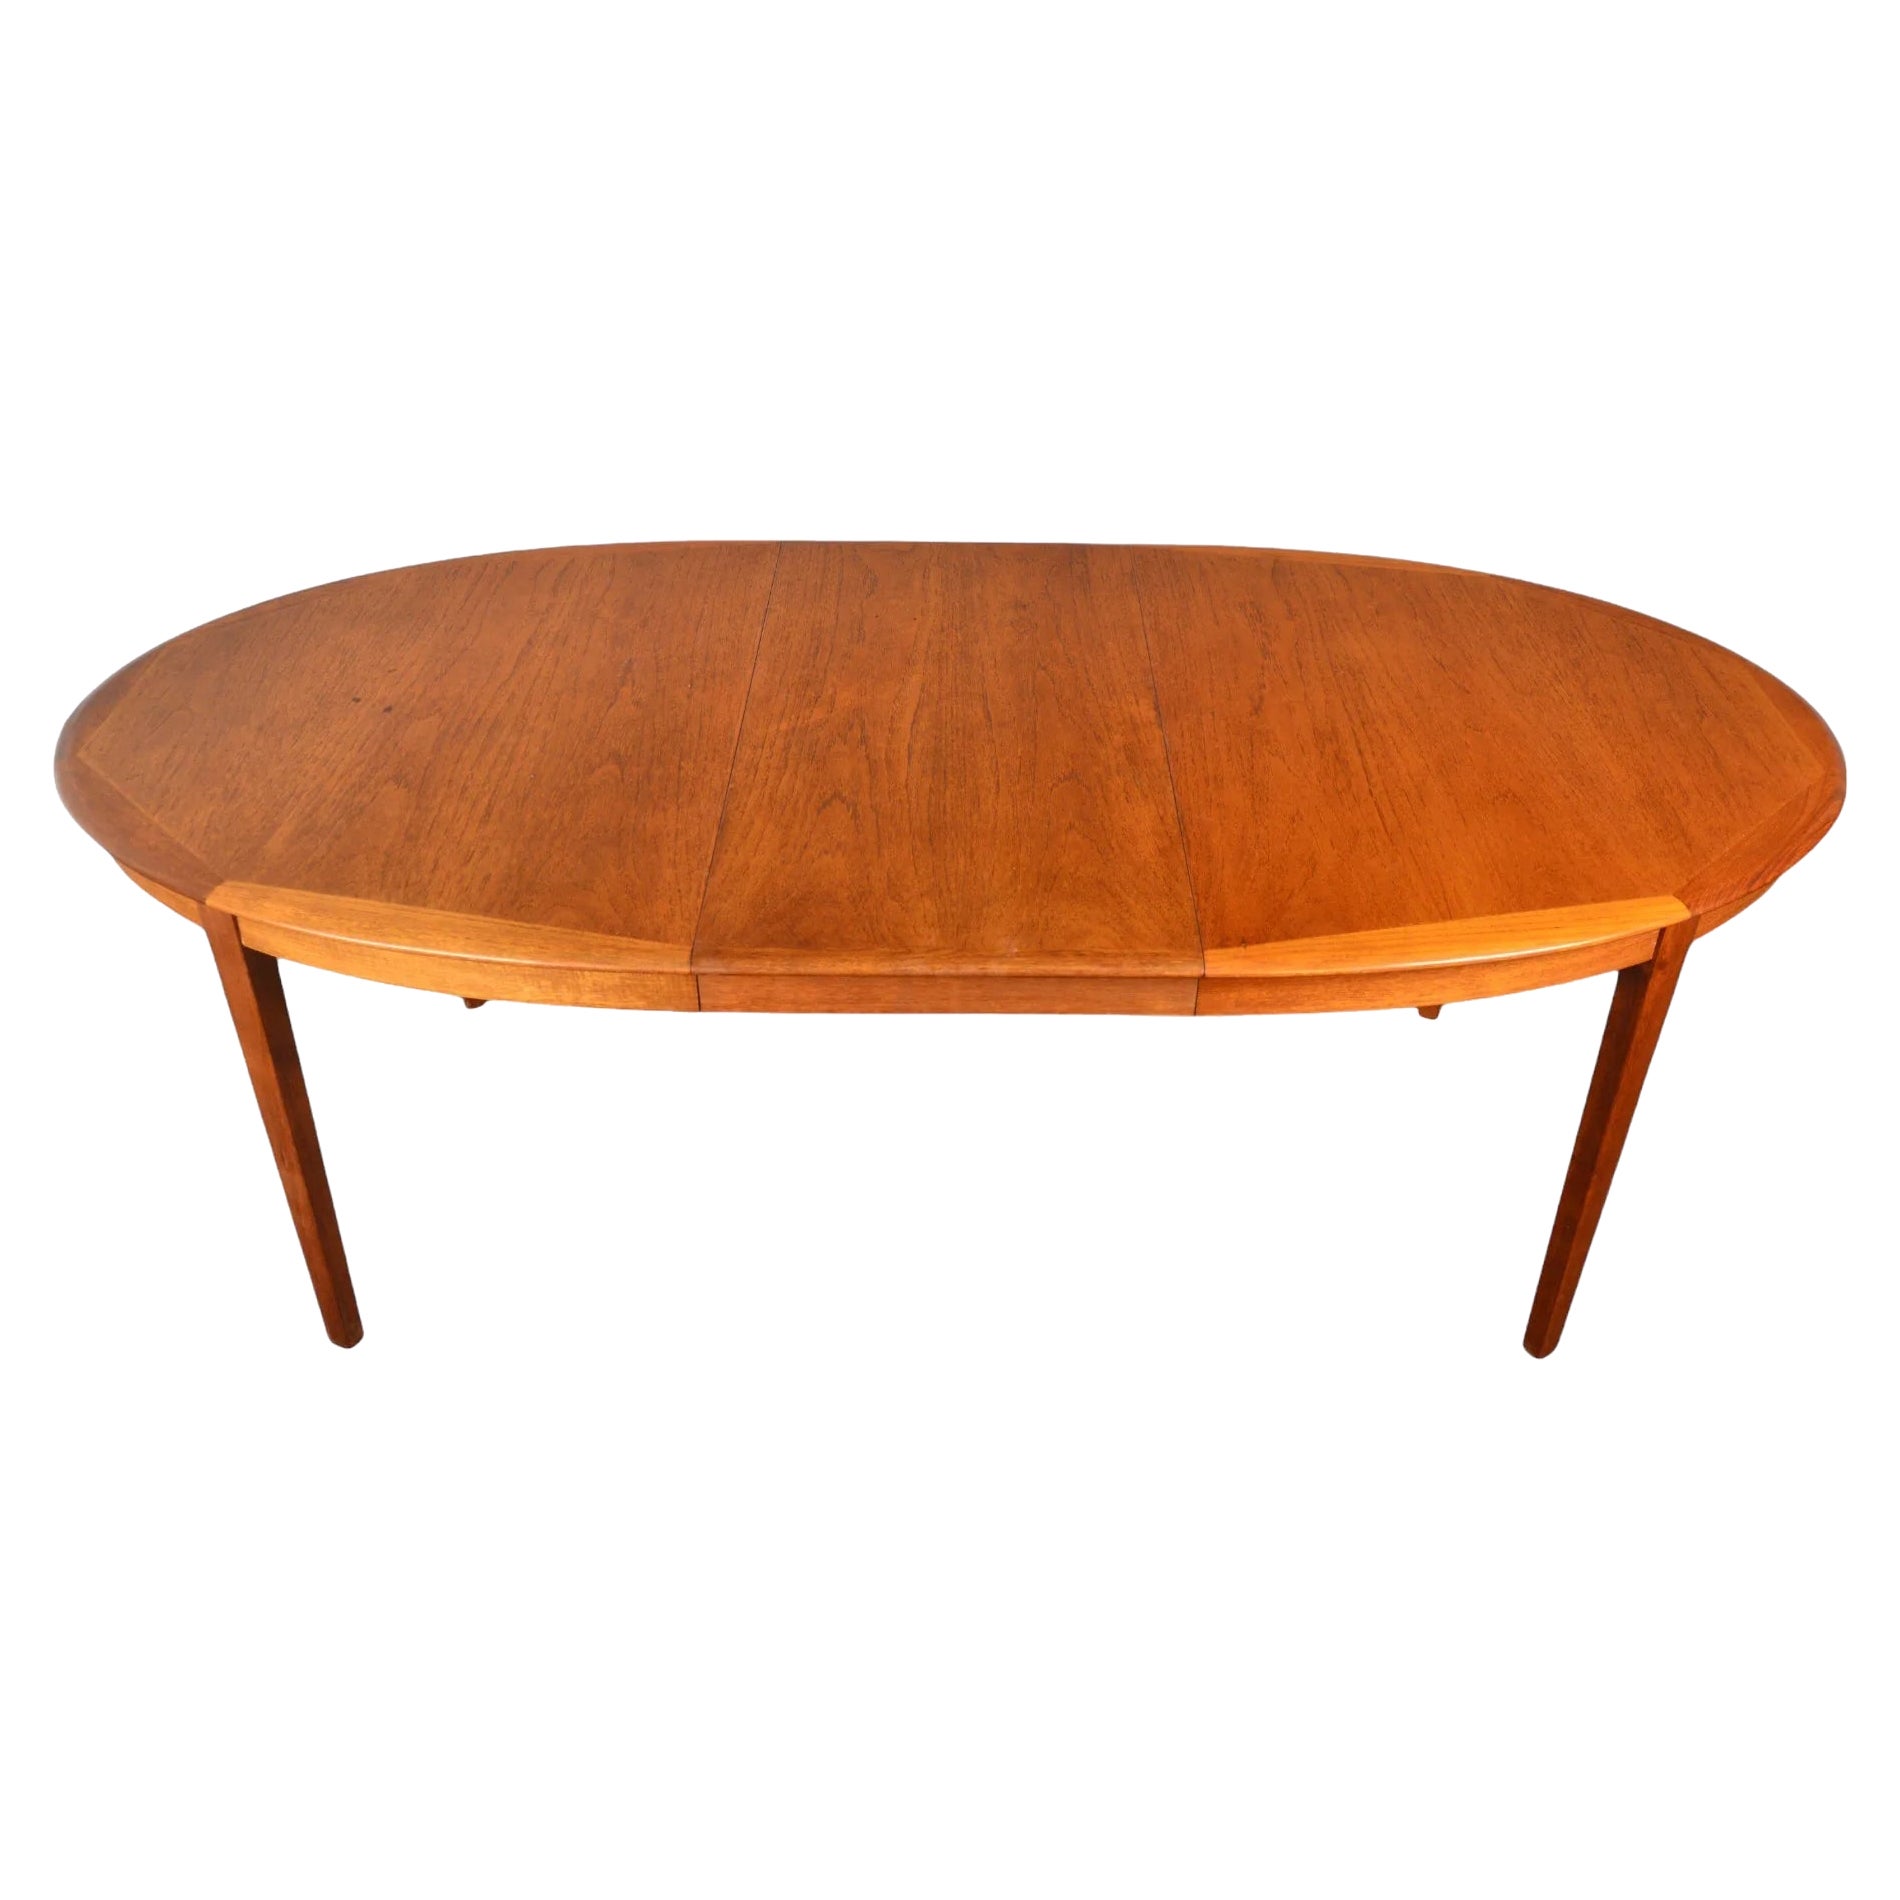 Danish Modern Oval Teak Dining Table + Two Leaves By Byrlund